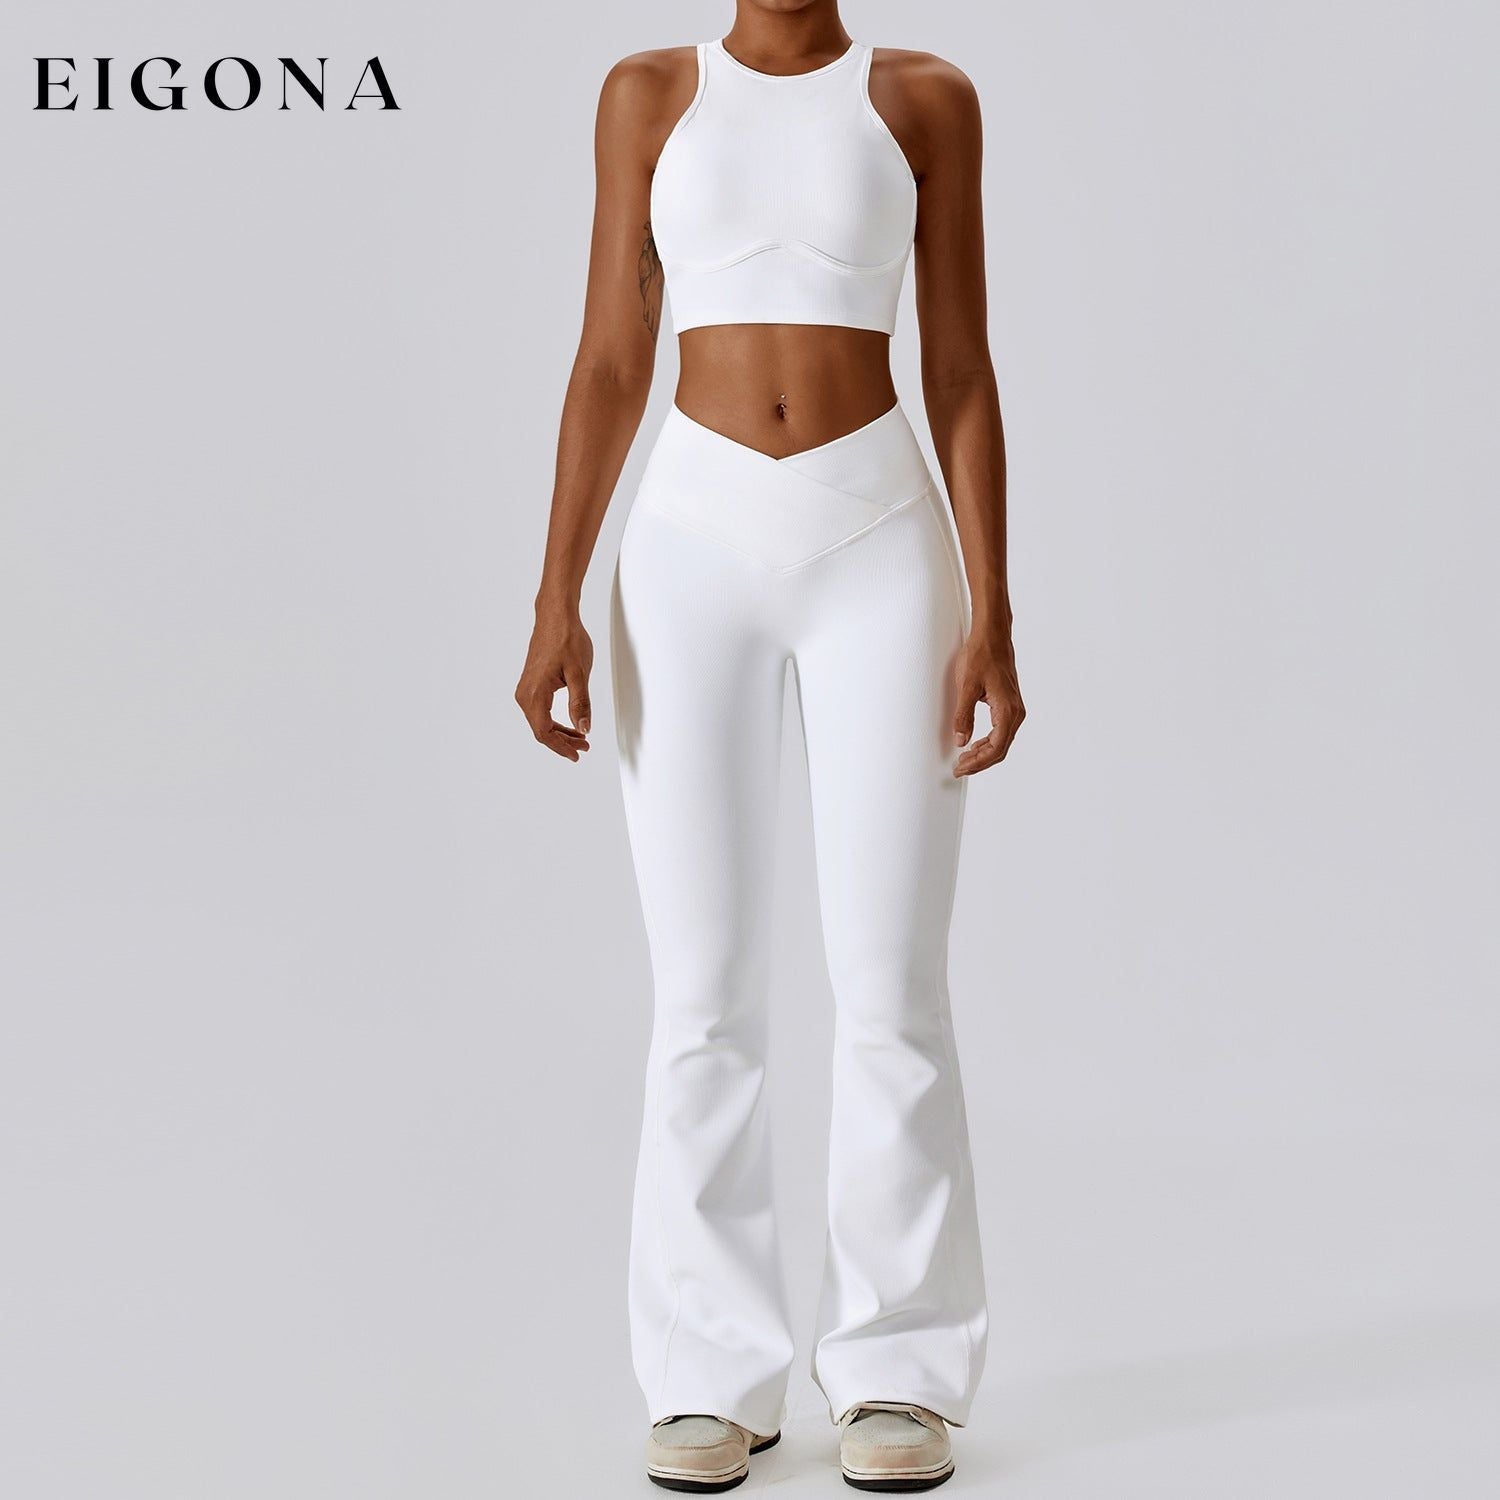 Thread Abdominal Shaping High Waist Beauty Back Yoga Suit Quick Drying Push up Hip Raise Skinny Workout Exercise Outfit -2 Bra Bell-Bottom Pants Swan White 2 piece activewear clothes set workout